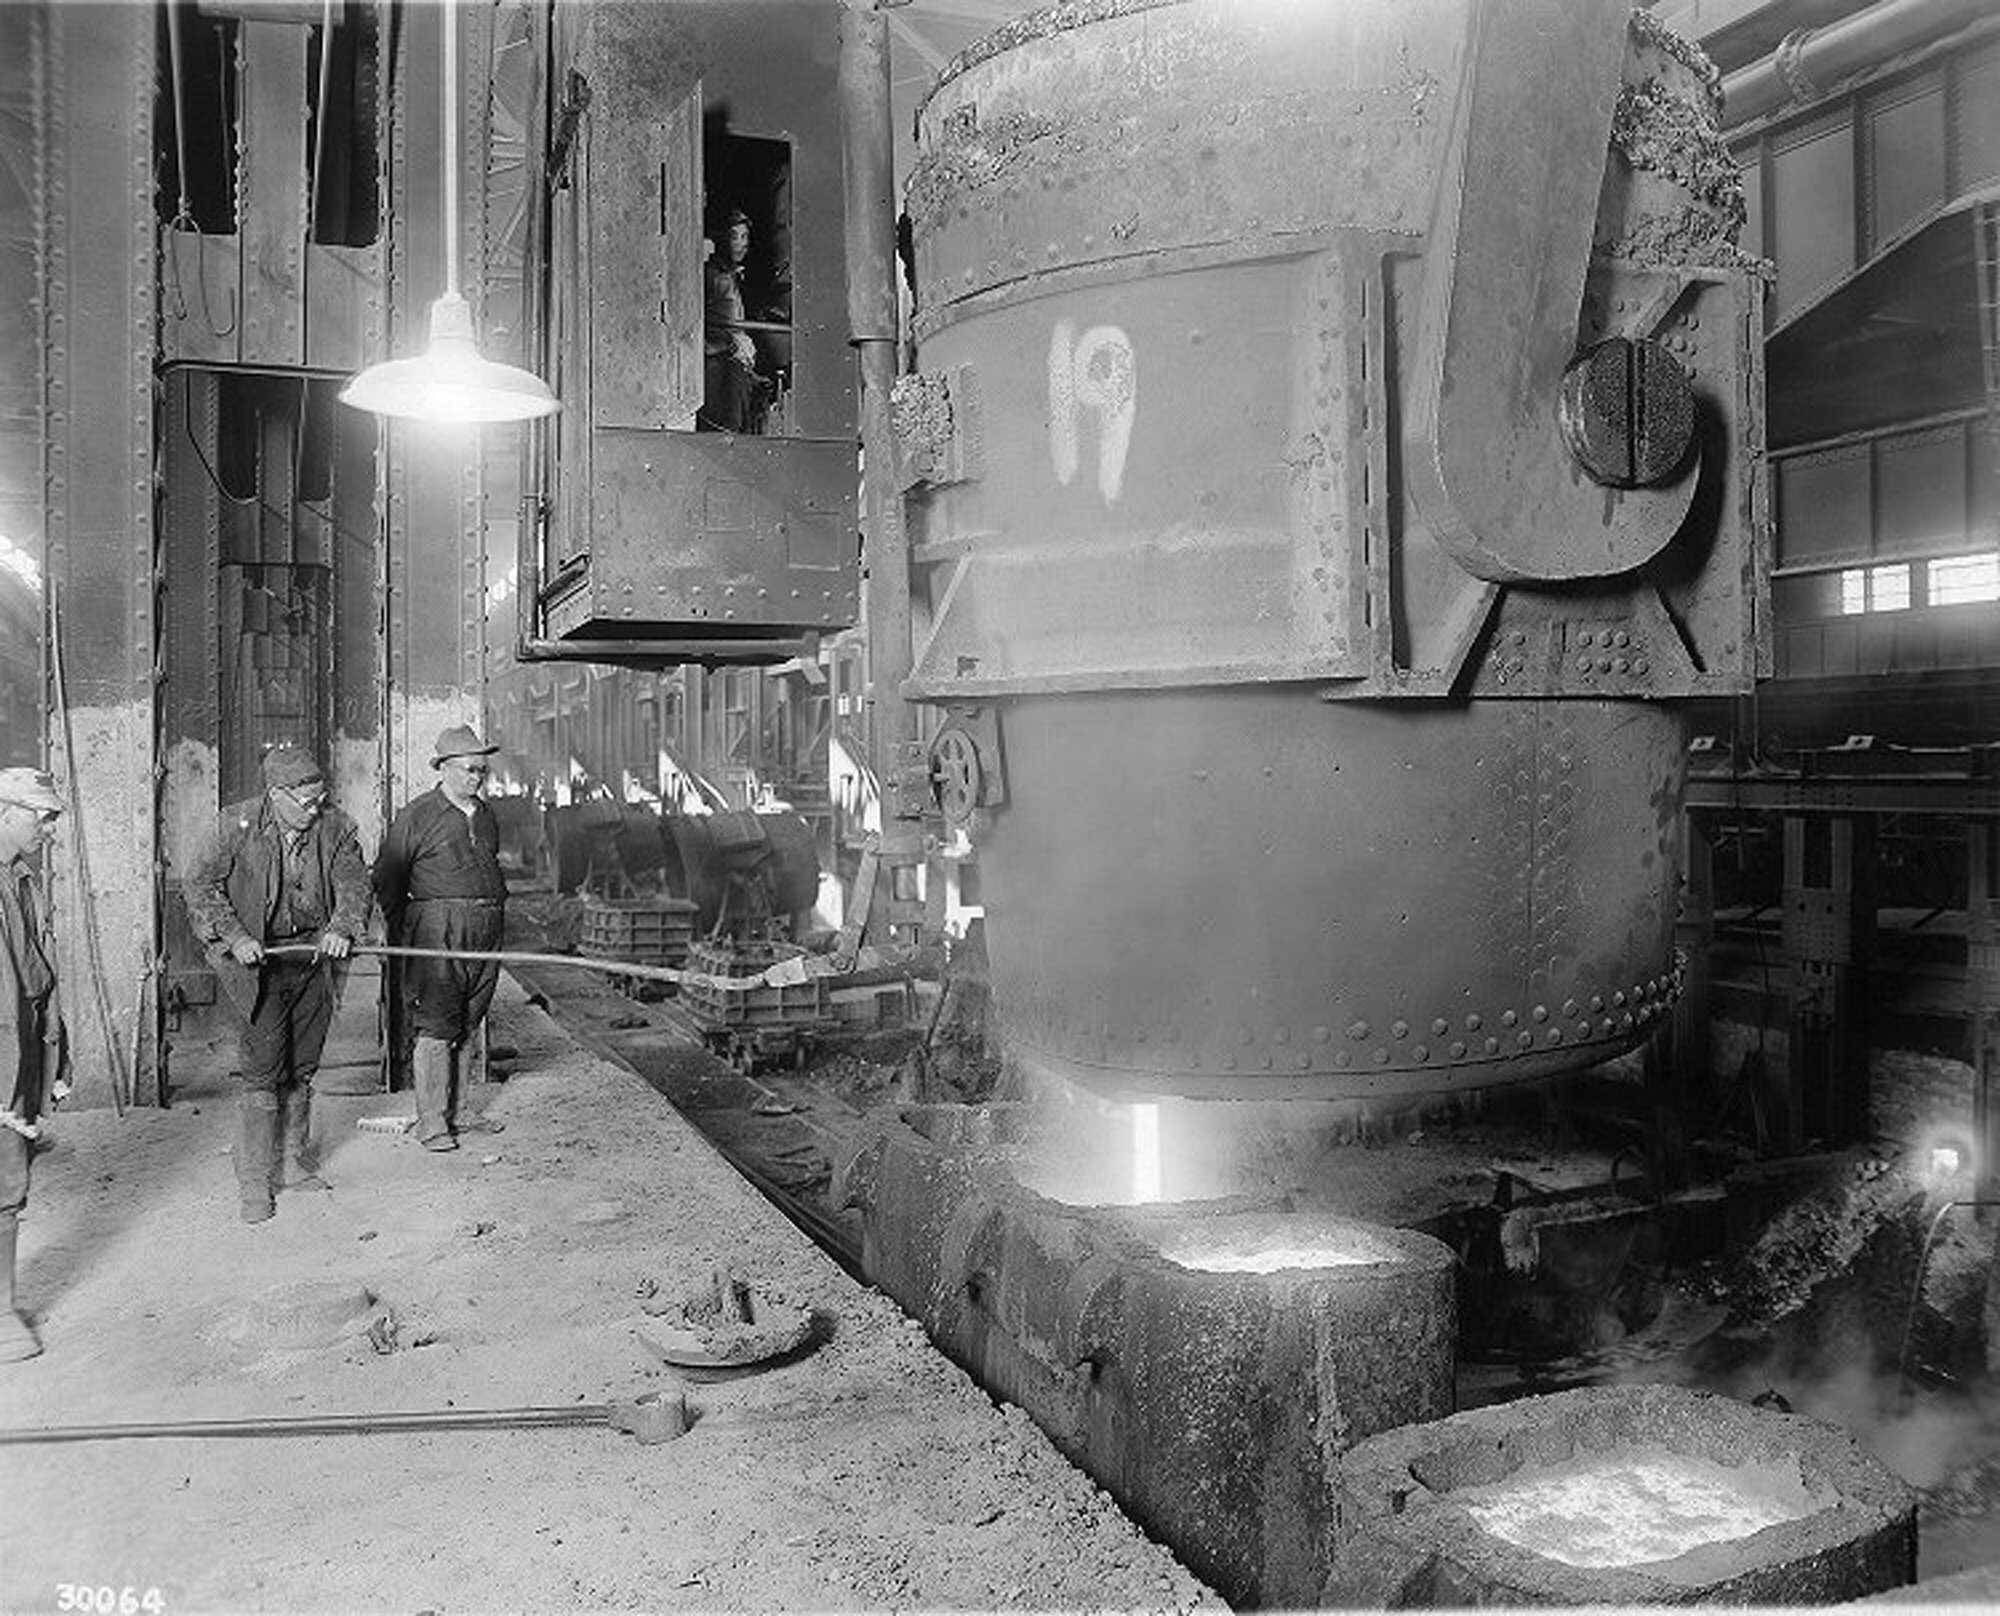 steel-workers-gaze-on-as-molten-steel-is-poured-from-ladle-to-casts-at-homestead-steel-works-december-31-1914-pd.jpg__2000x1616_q85_crop_subsampling-2_upscale.jpg